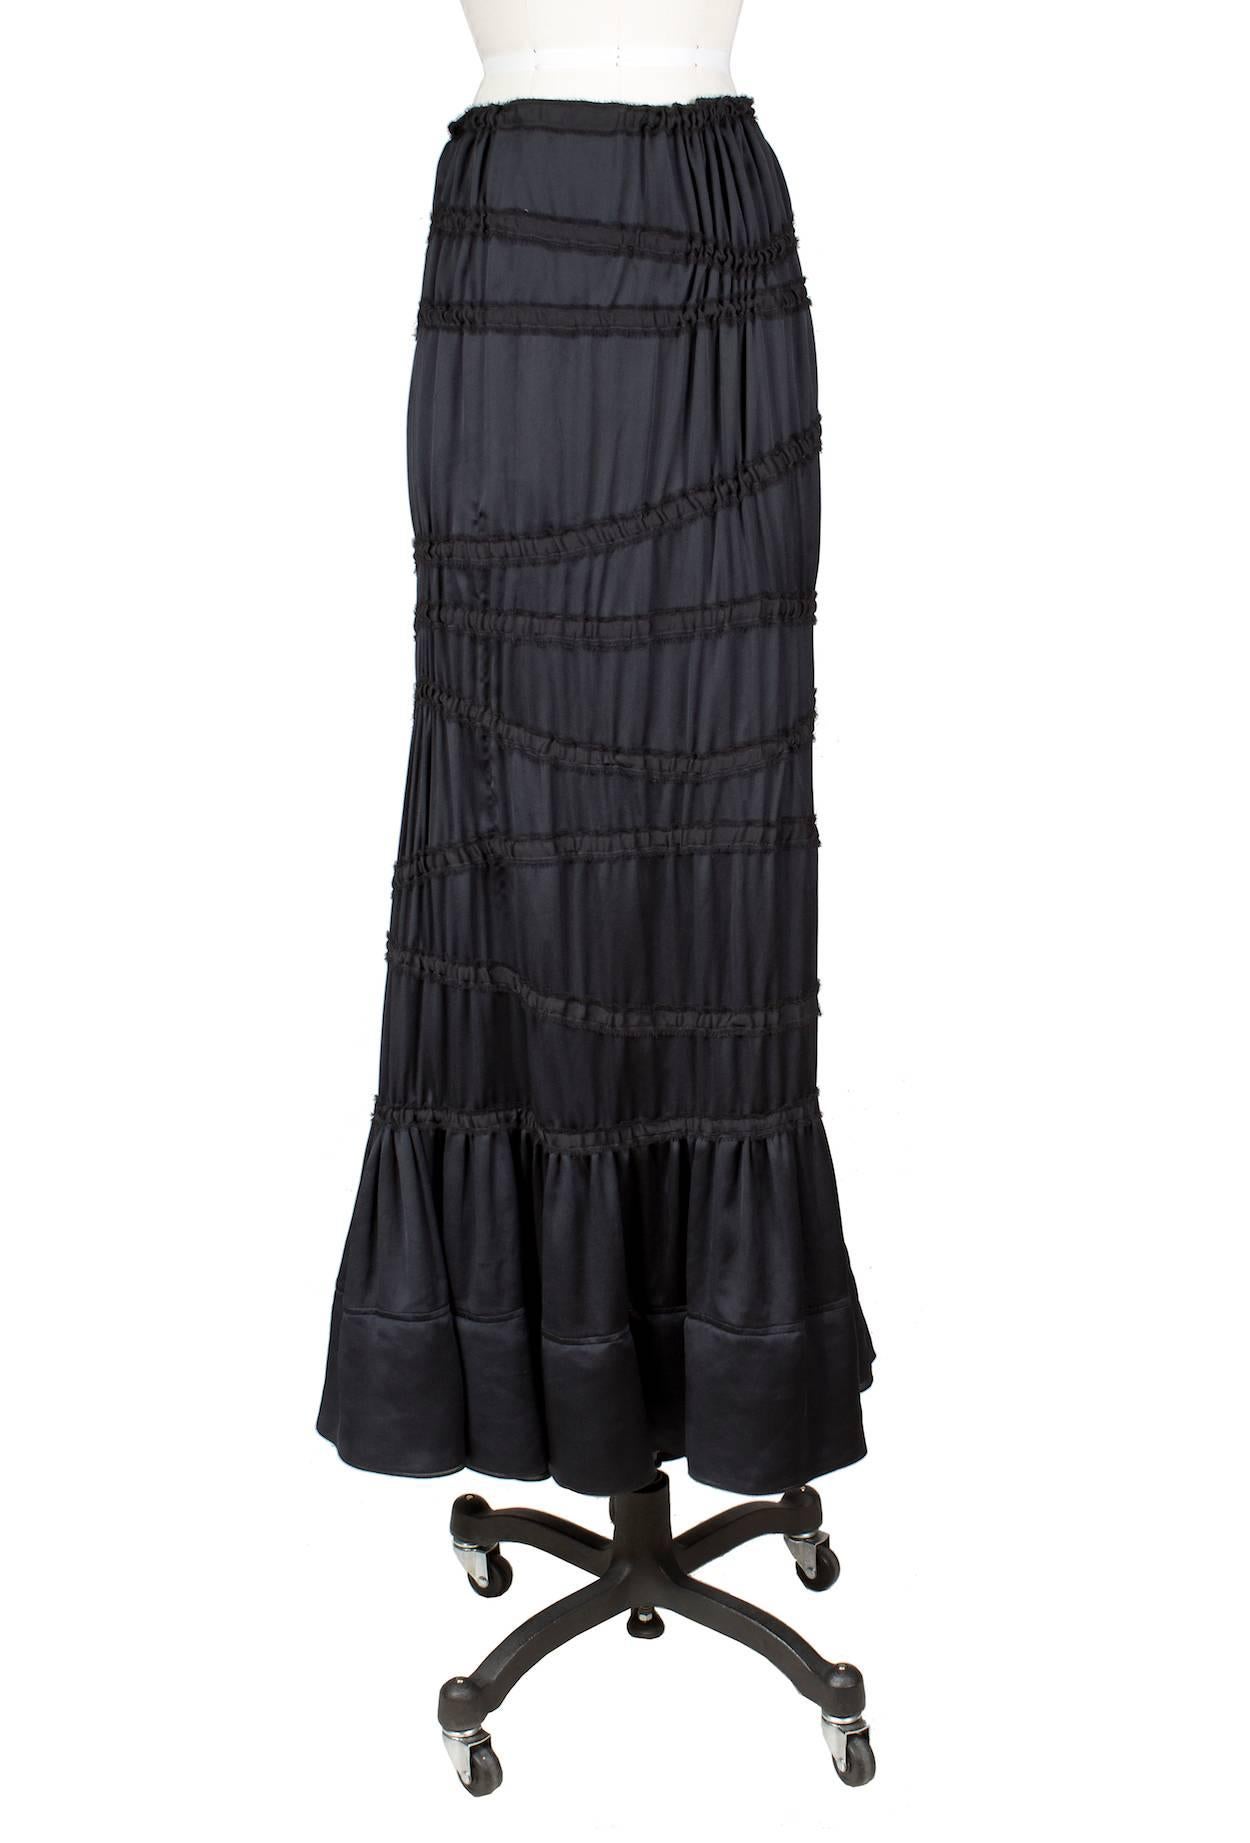 This is a modern black peasant skirt by Tom Ford for YSL from the Fall 2001.  It features ruched piping tiers and the closure is an invisible zipper down the side with a top hook and eye closure.  